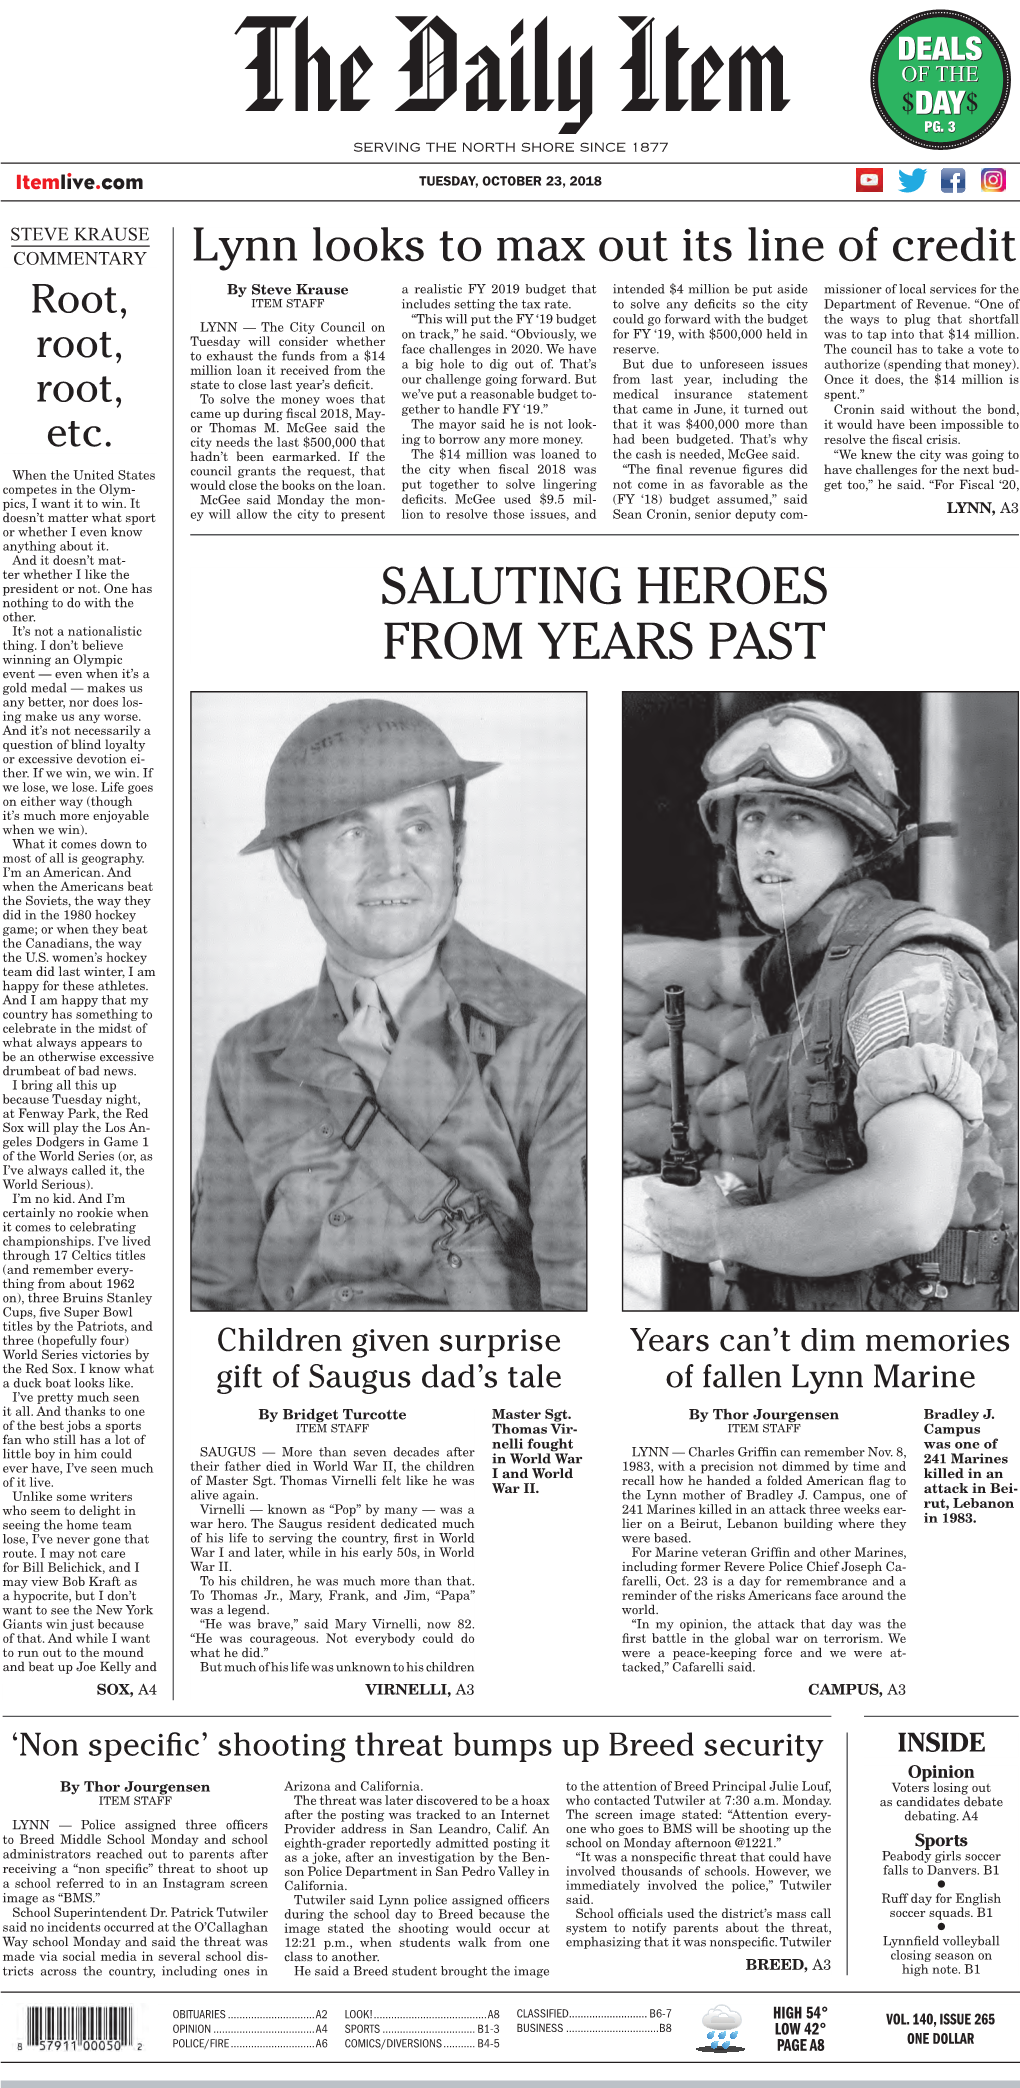 Saluting Heroes from Years Past